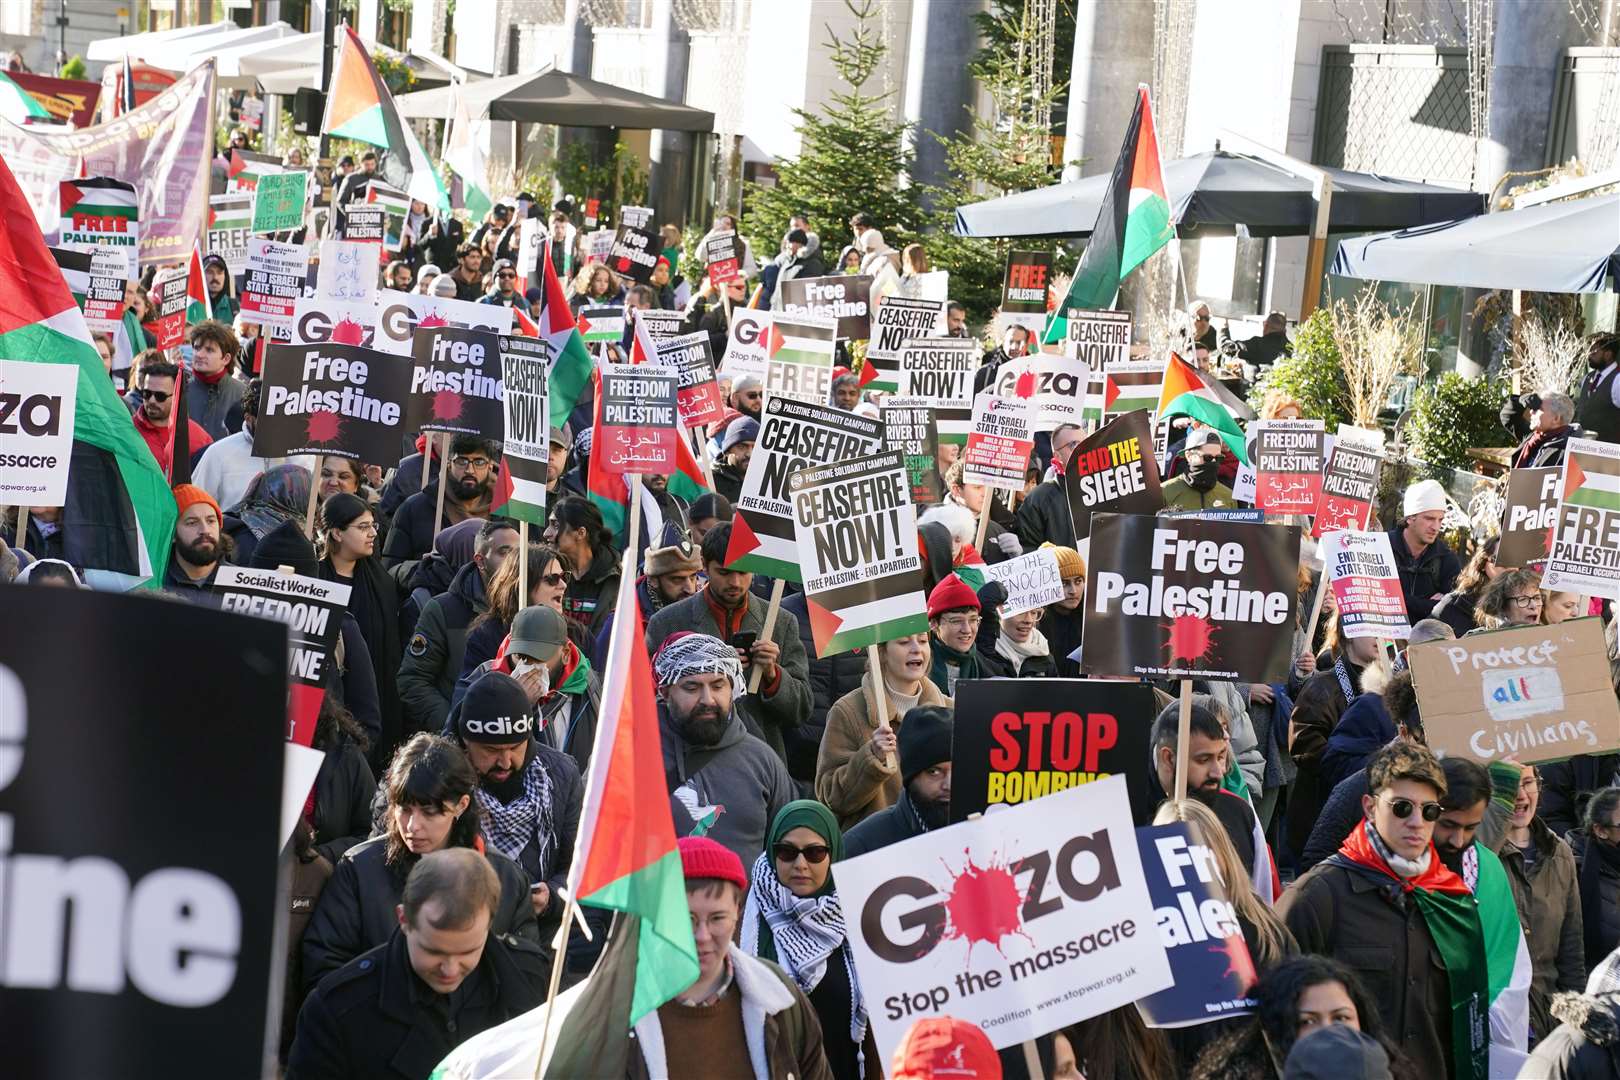 People took part in the National March for Palestine, organised by the Palestine Solidarity Campaign, in central London on Saturday (Lucy North/PA)